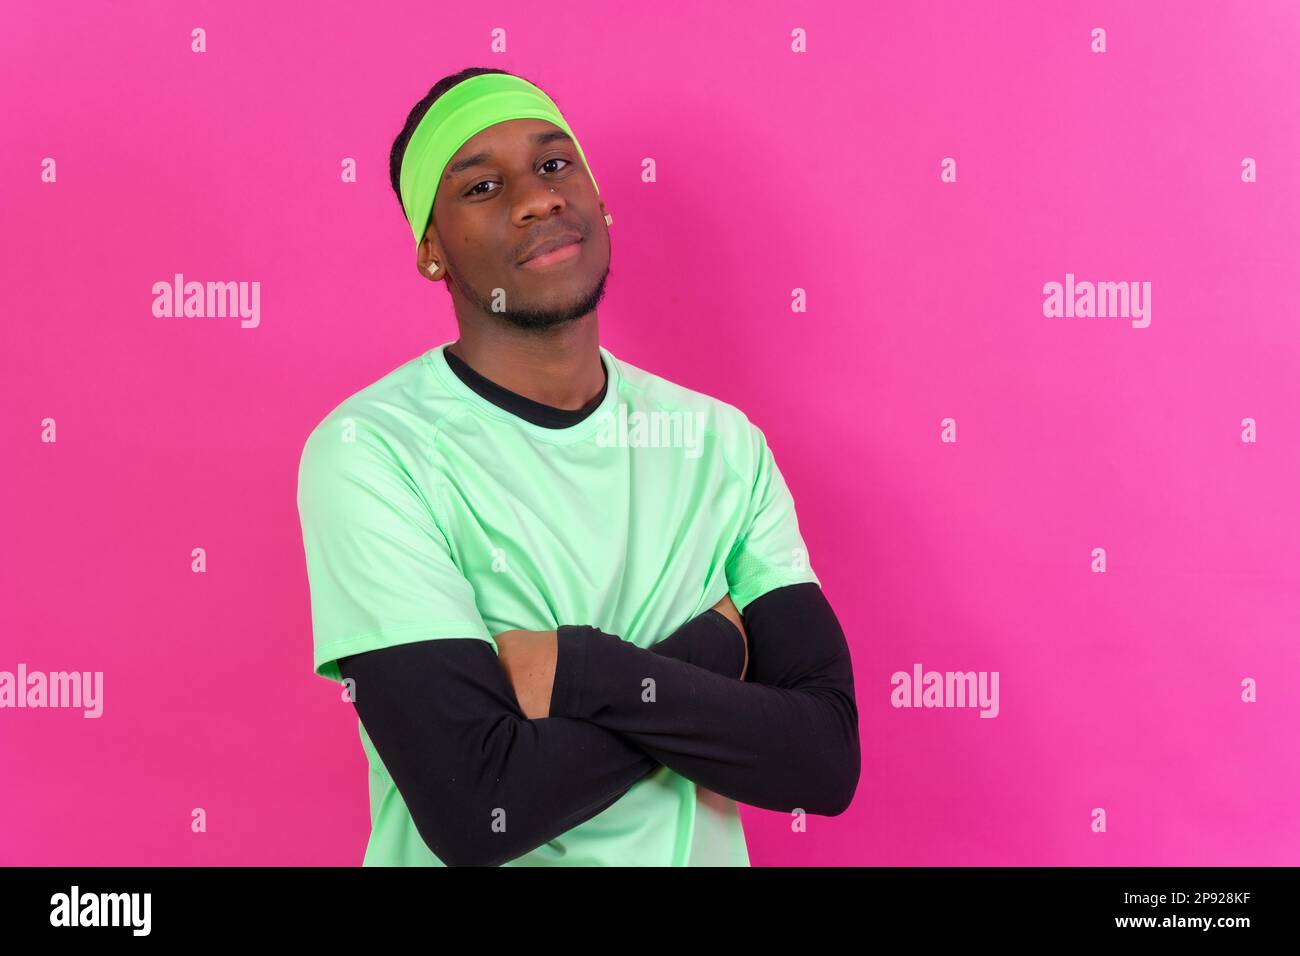 Black ethnic man in green clothes on a pink background, concept portrait, arms crossed Stock Photo